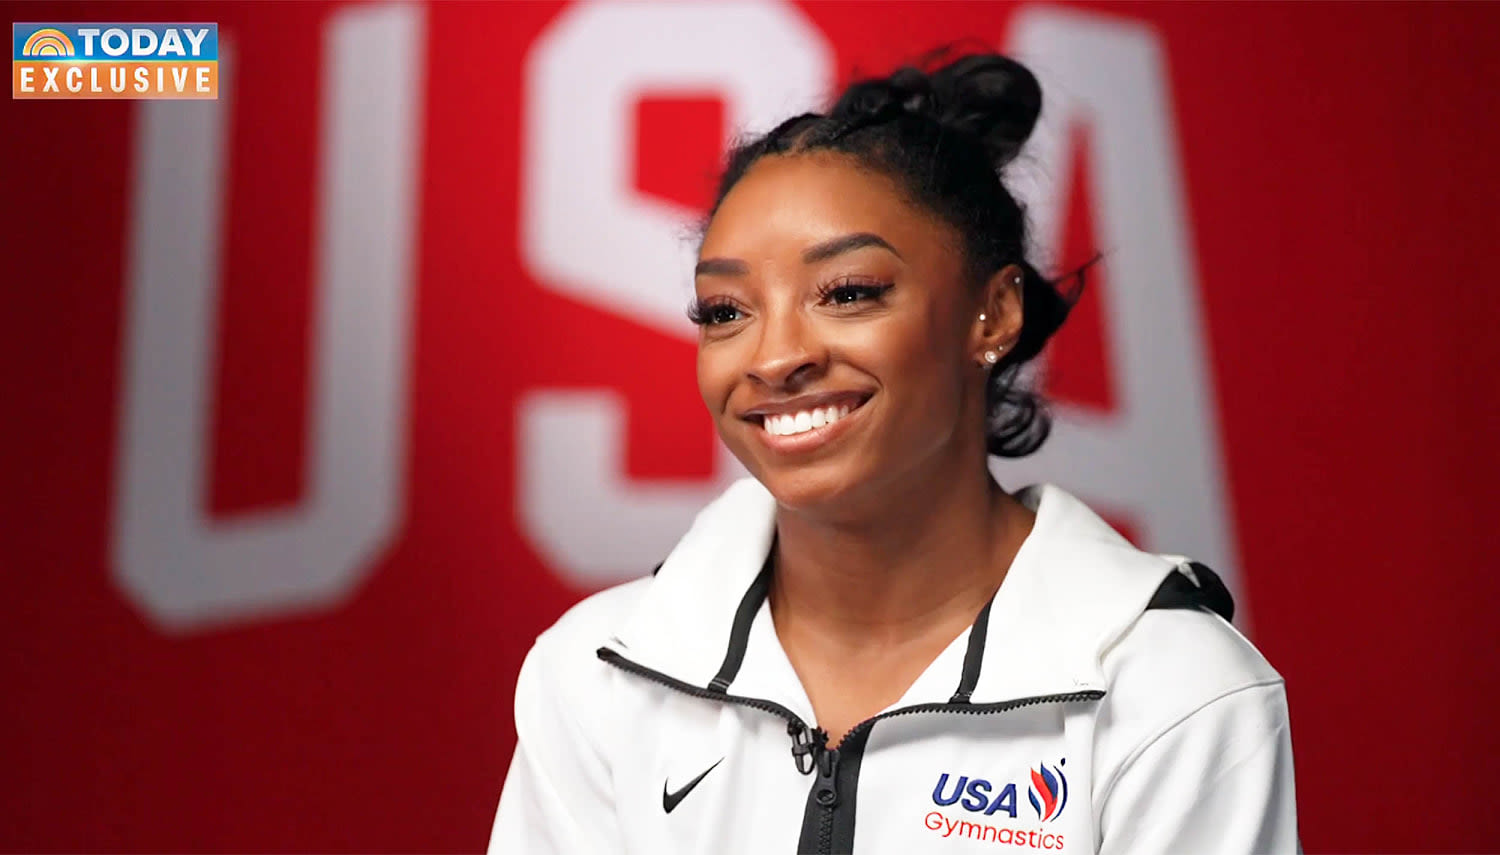 EXCLUSIVE: What’s changed for Simone Biles since Tokyo Olympics? Her magic is ‘limiting social media’